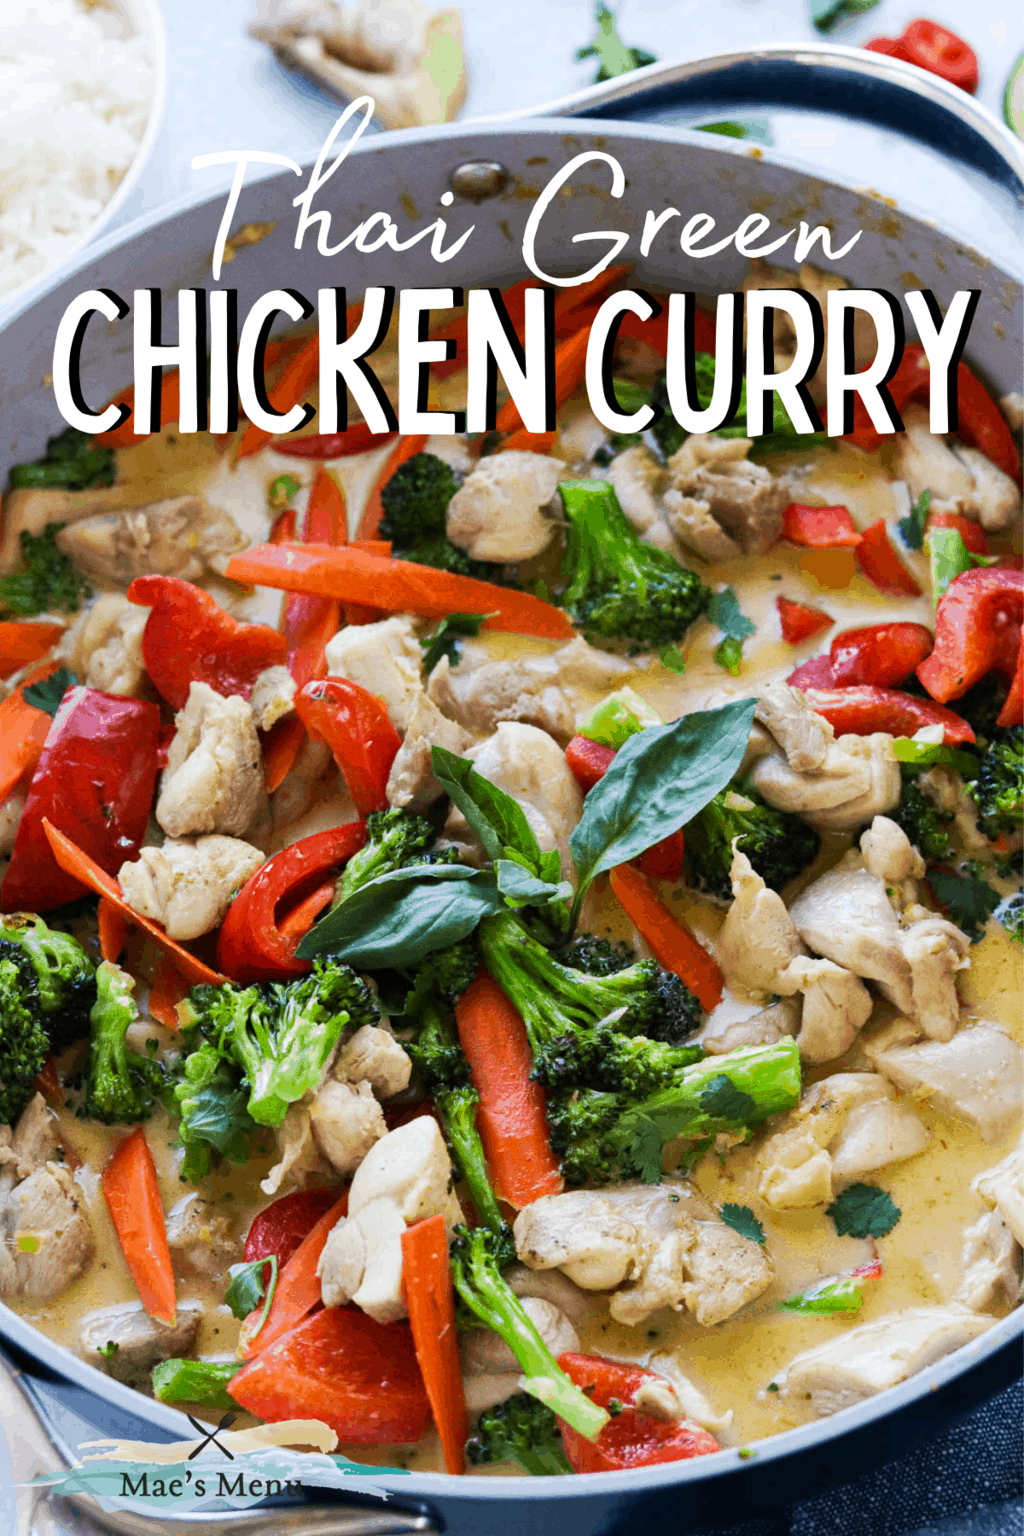 A pinterest pin for thai green chicken curry with an upclose photo of the curry in a pan